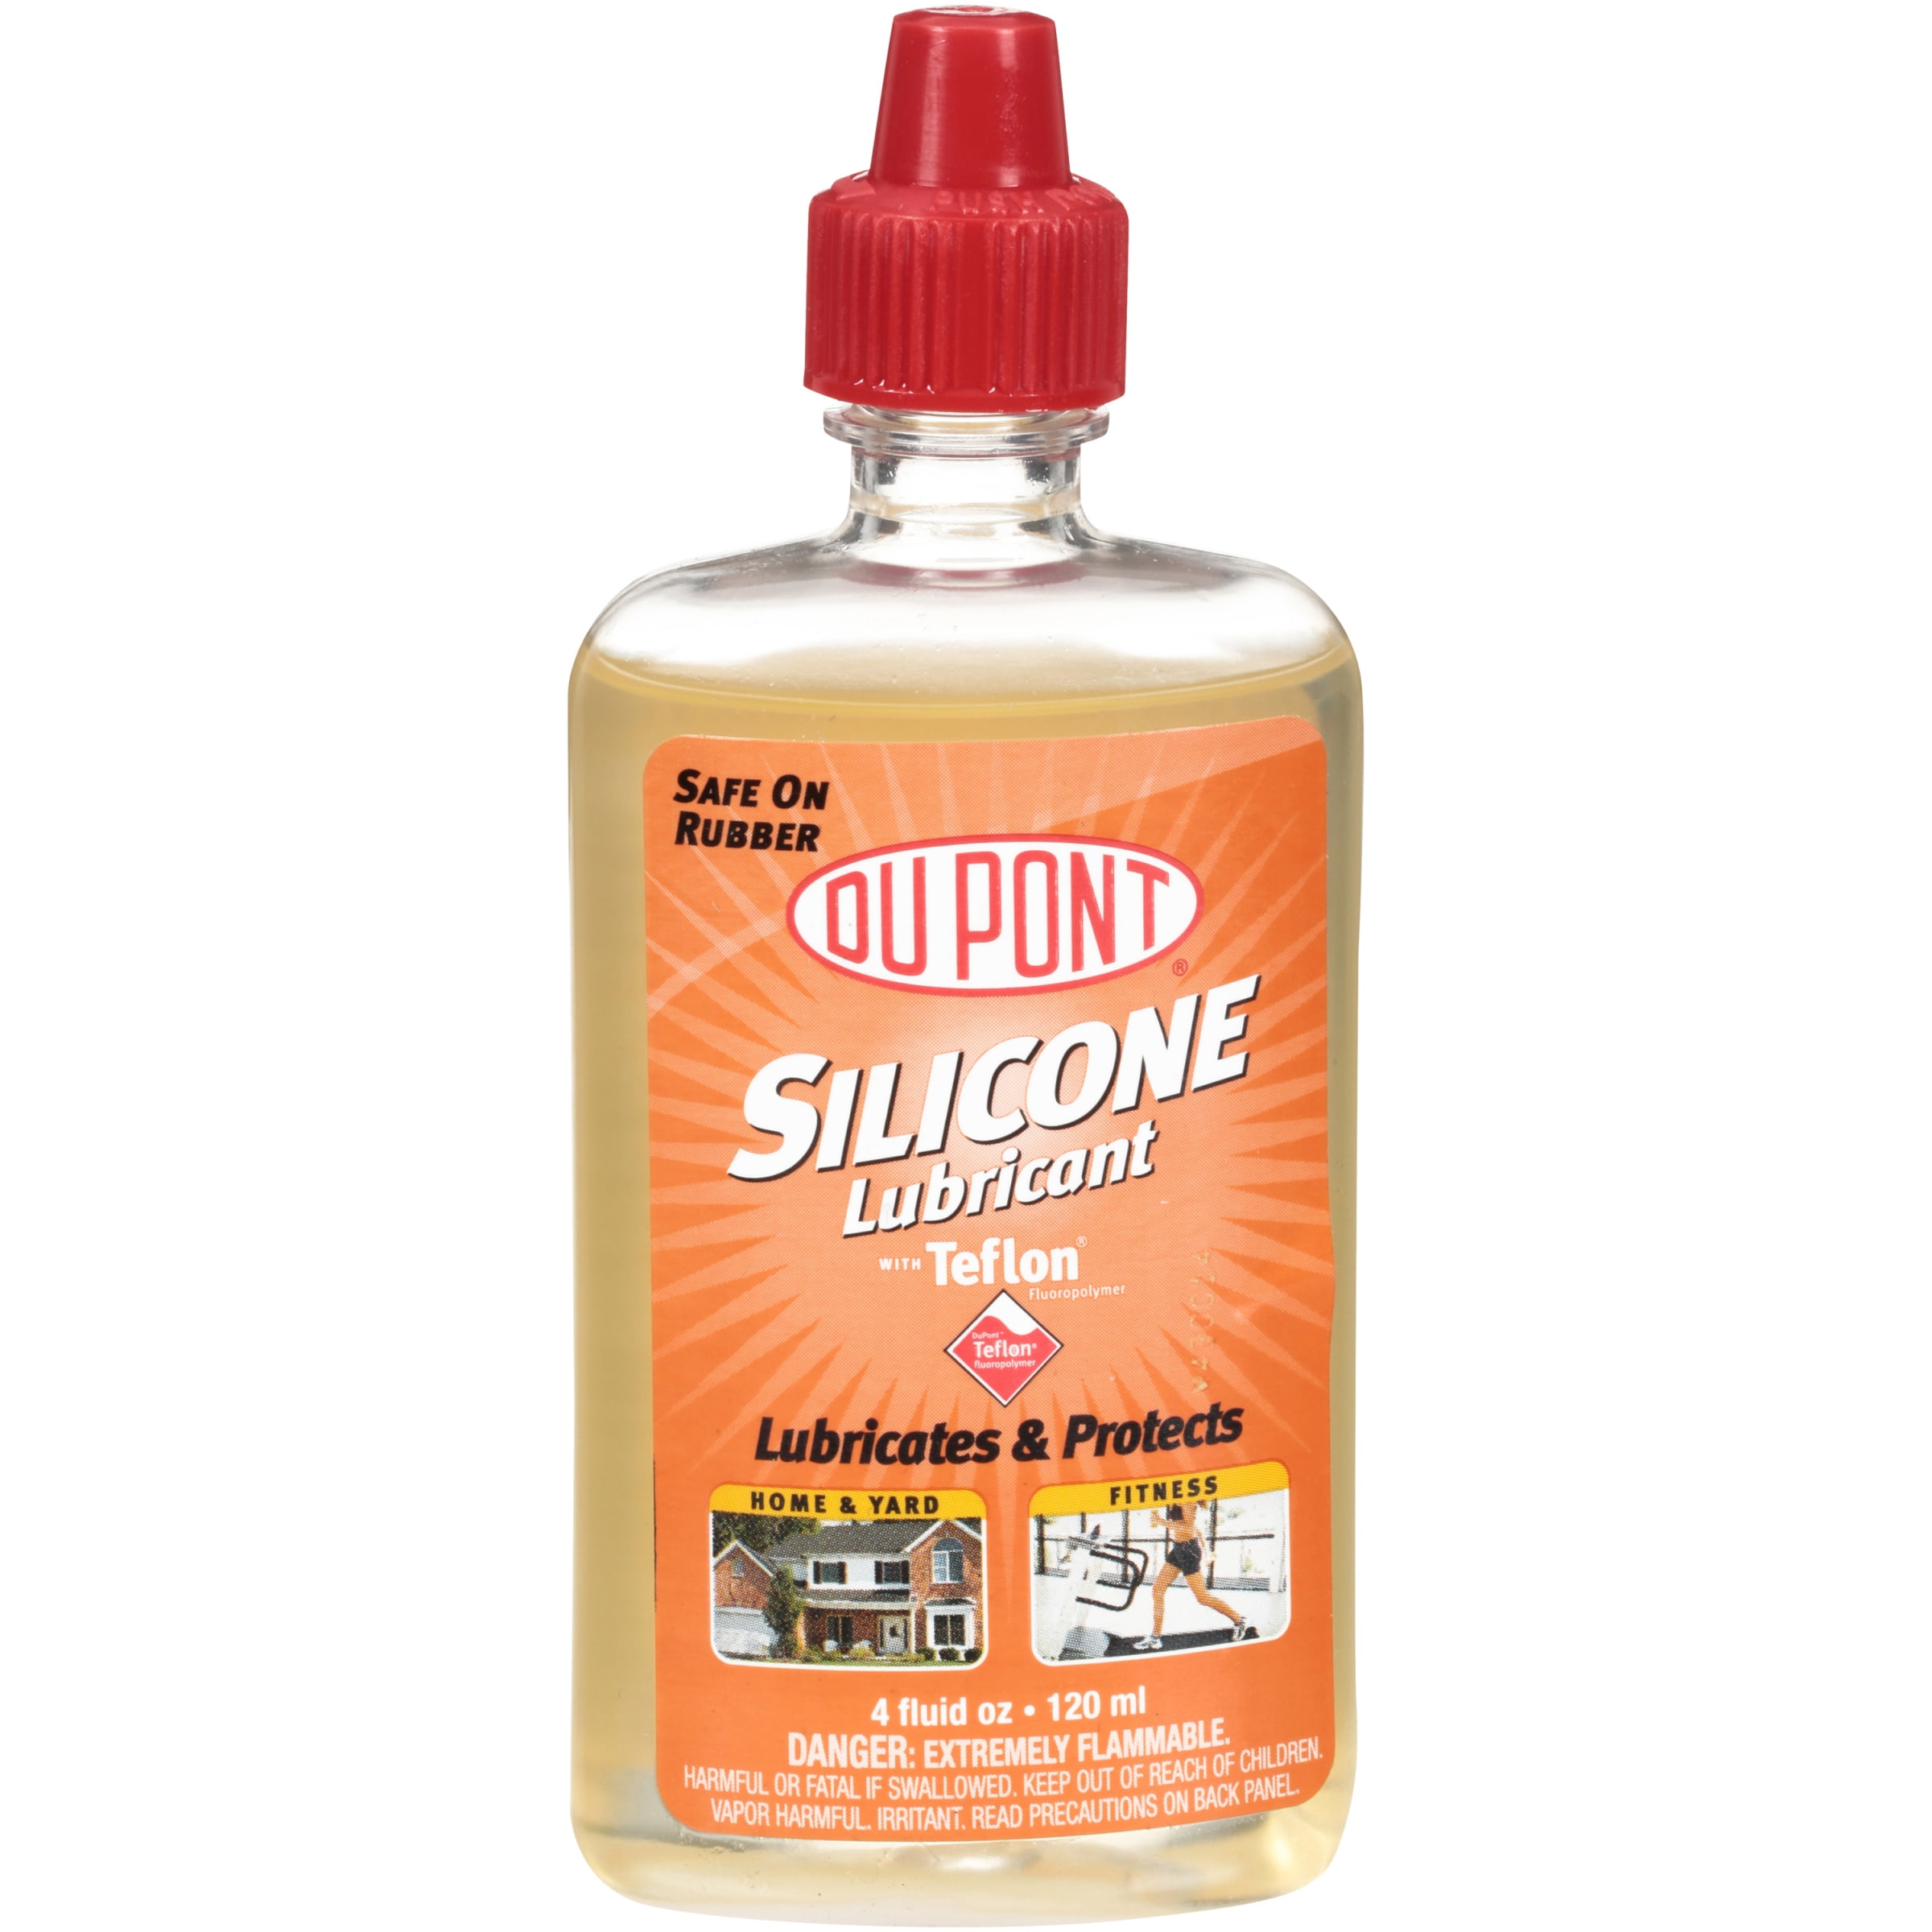 Use Du Pont Silicone Lubricant with Teflon in your home and yard for extra ...